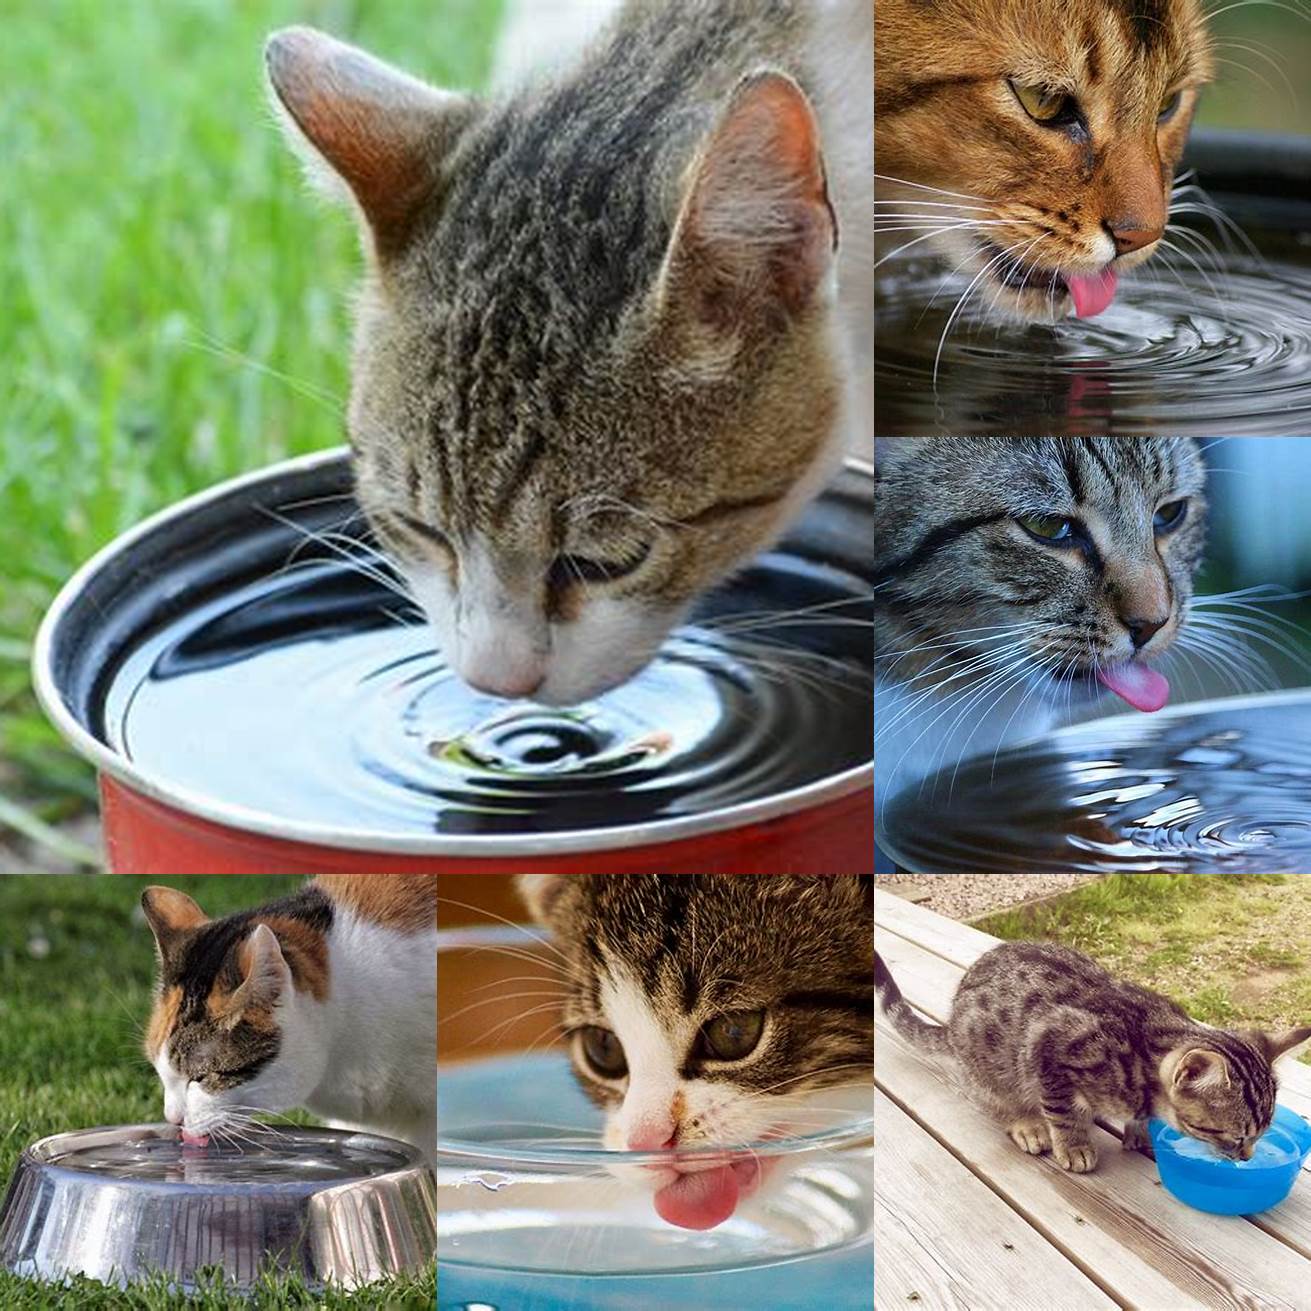 Image of a cat drinking water